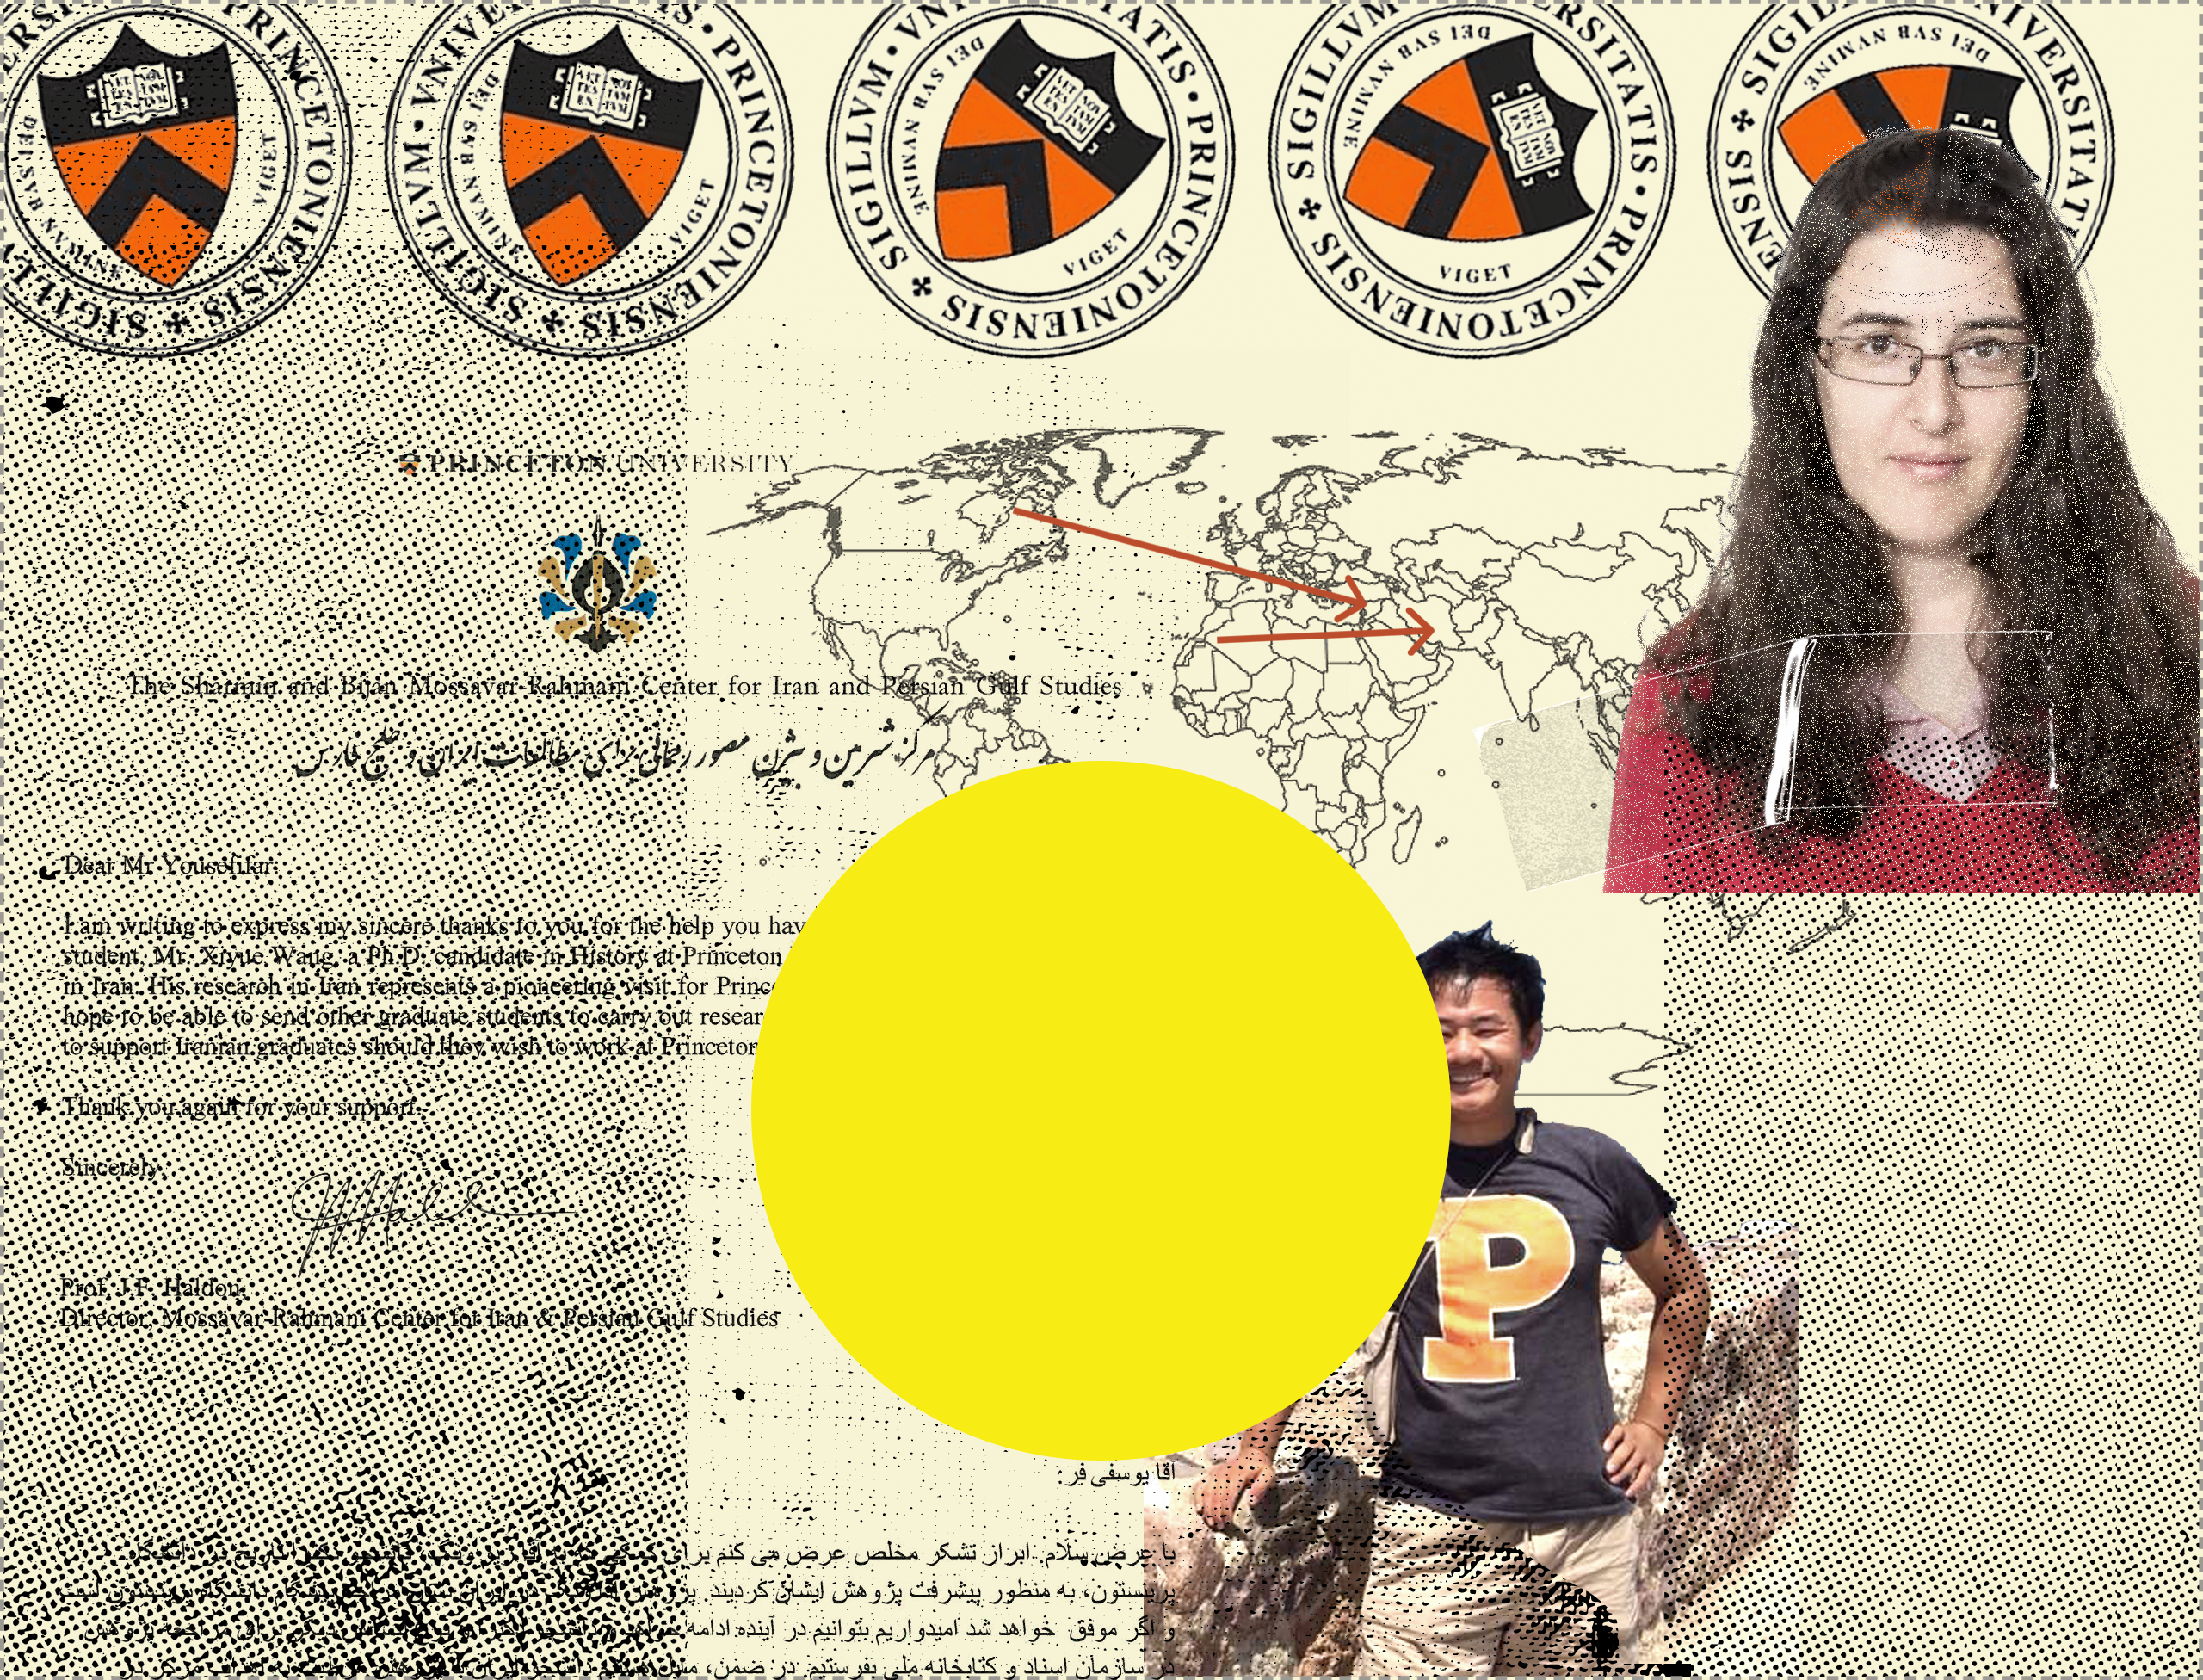 How Princeton got burned by its outreach to Iran